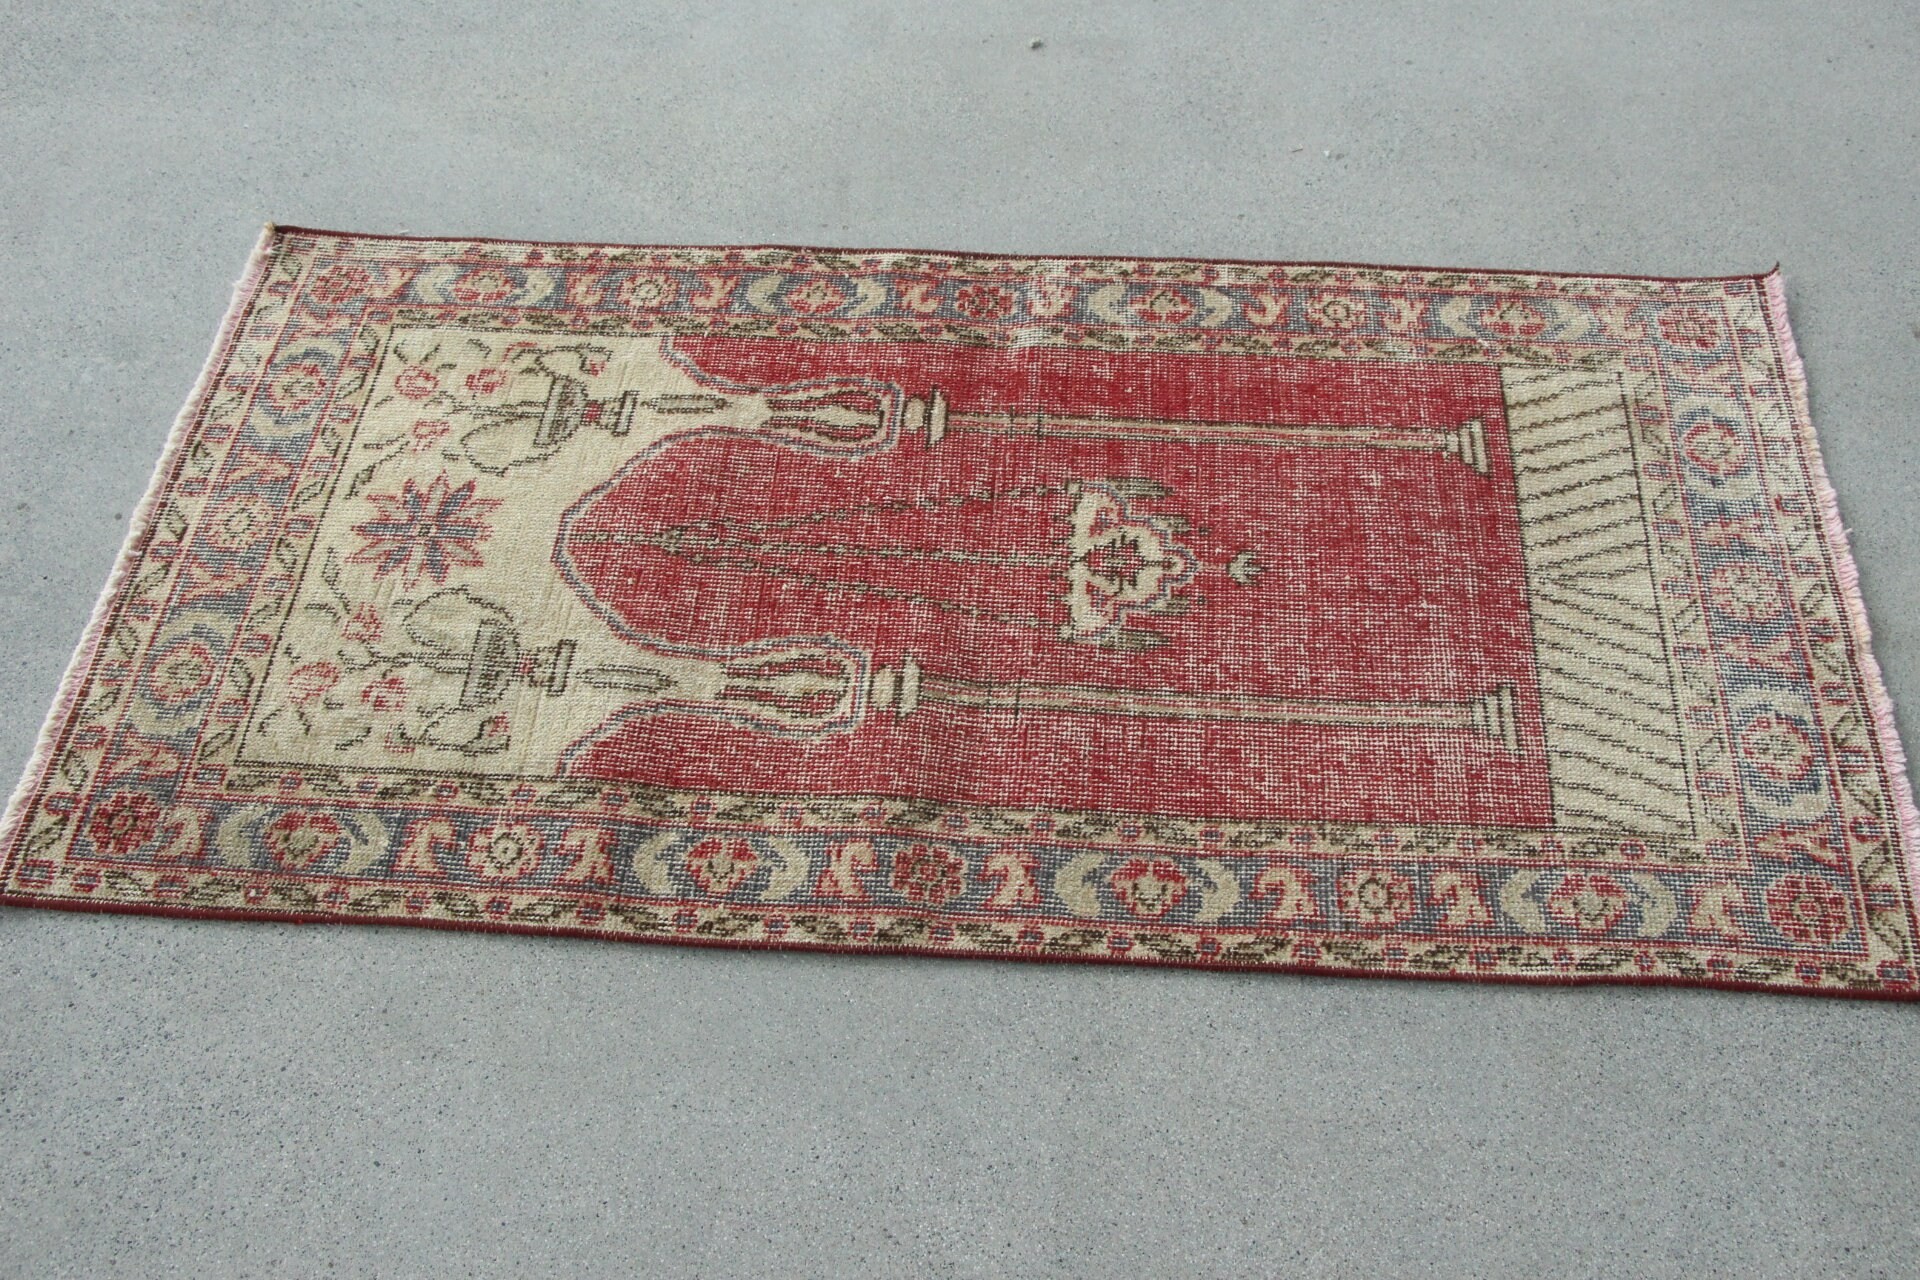 Handwoven Rug, Red Cool Rugs, Rugs for Bath, 2.3x4.6 ft Small Rug, Oriental Rugs, Bathroom Rug, Turkish Rugs, Home Decor Rugs, Vintage Rugs